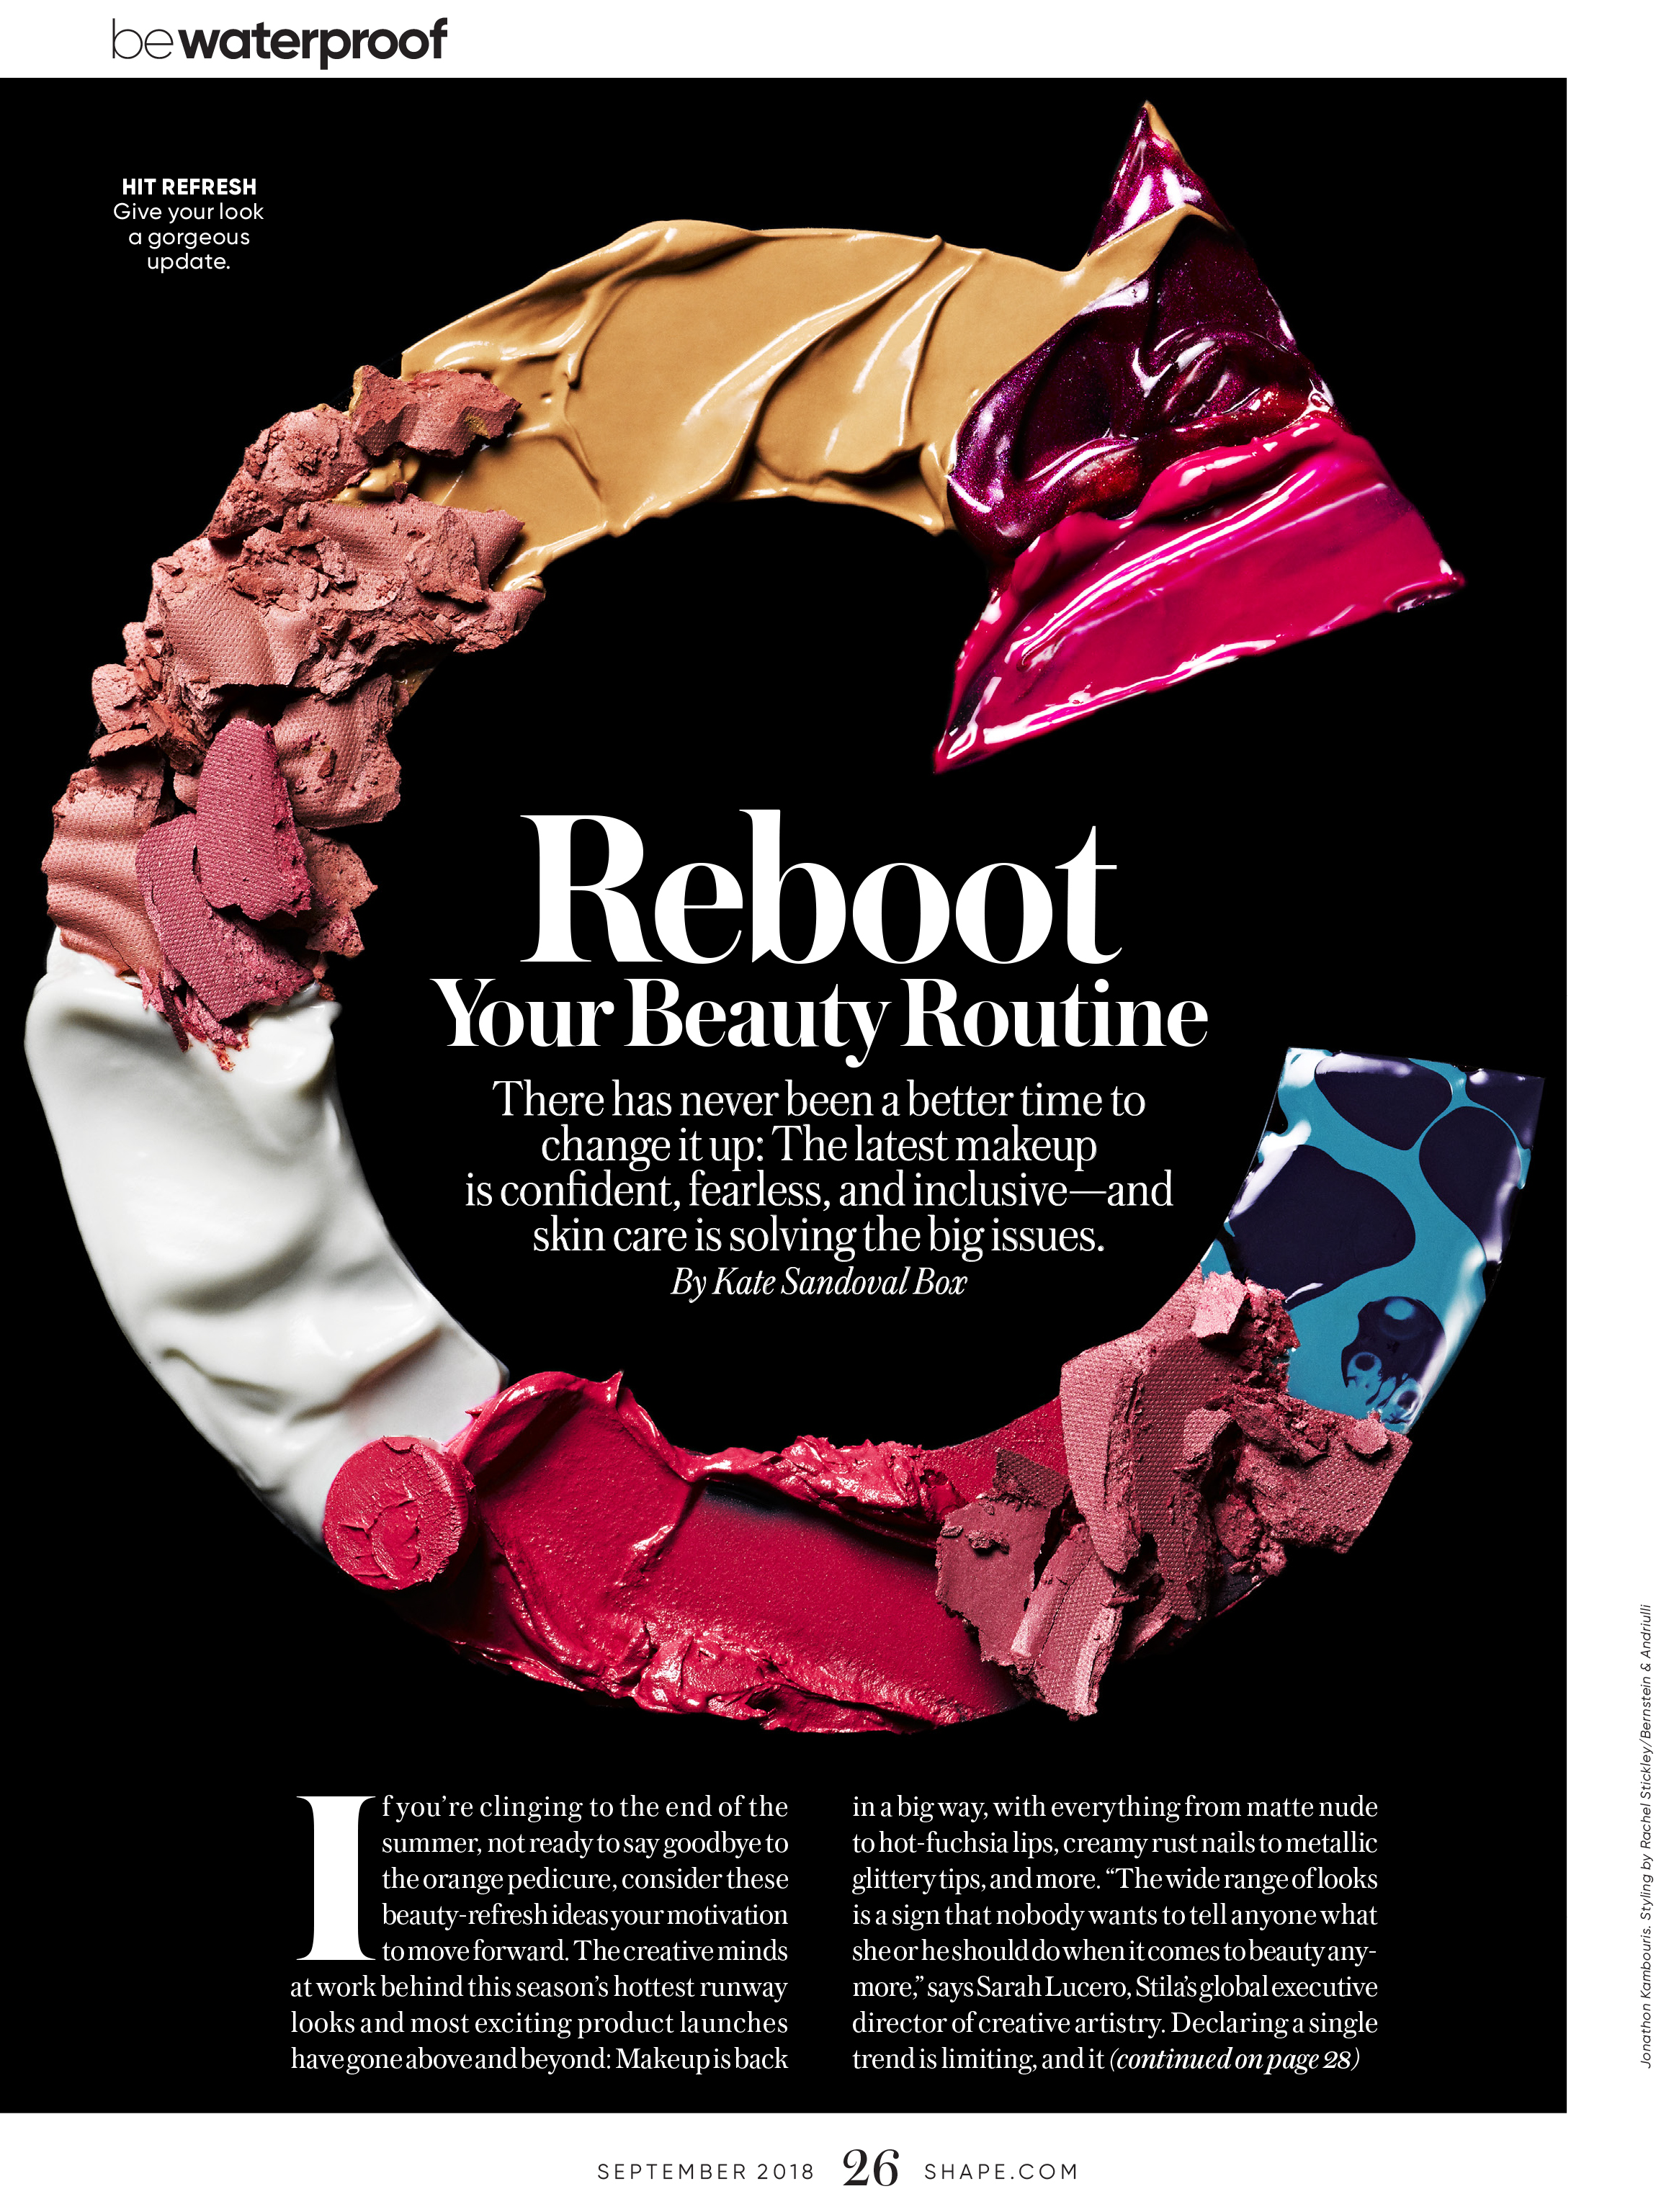 Reboot Your Beauty Routine, September 2018